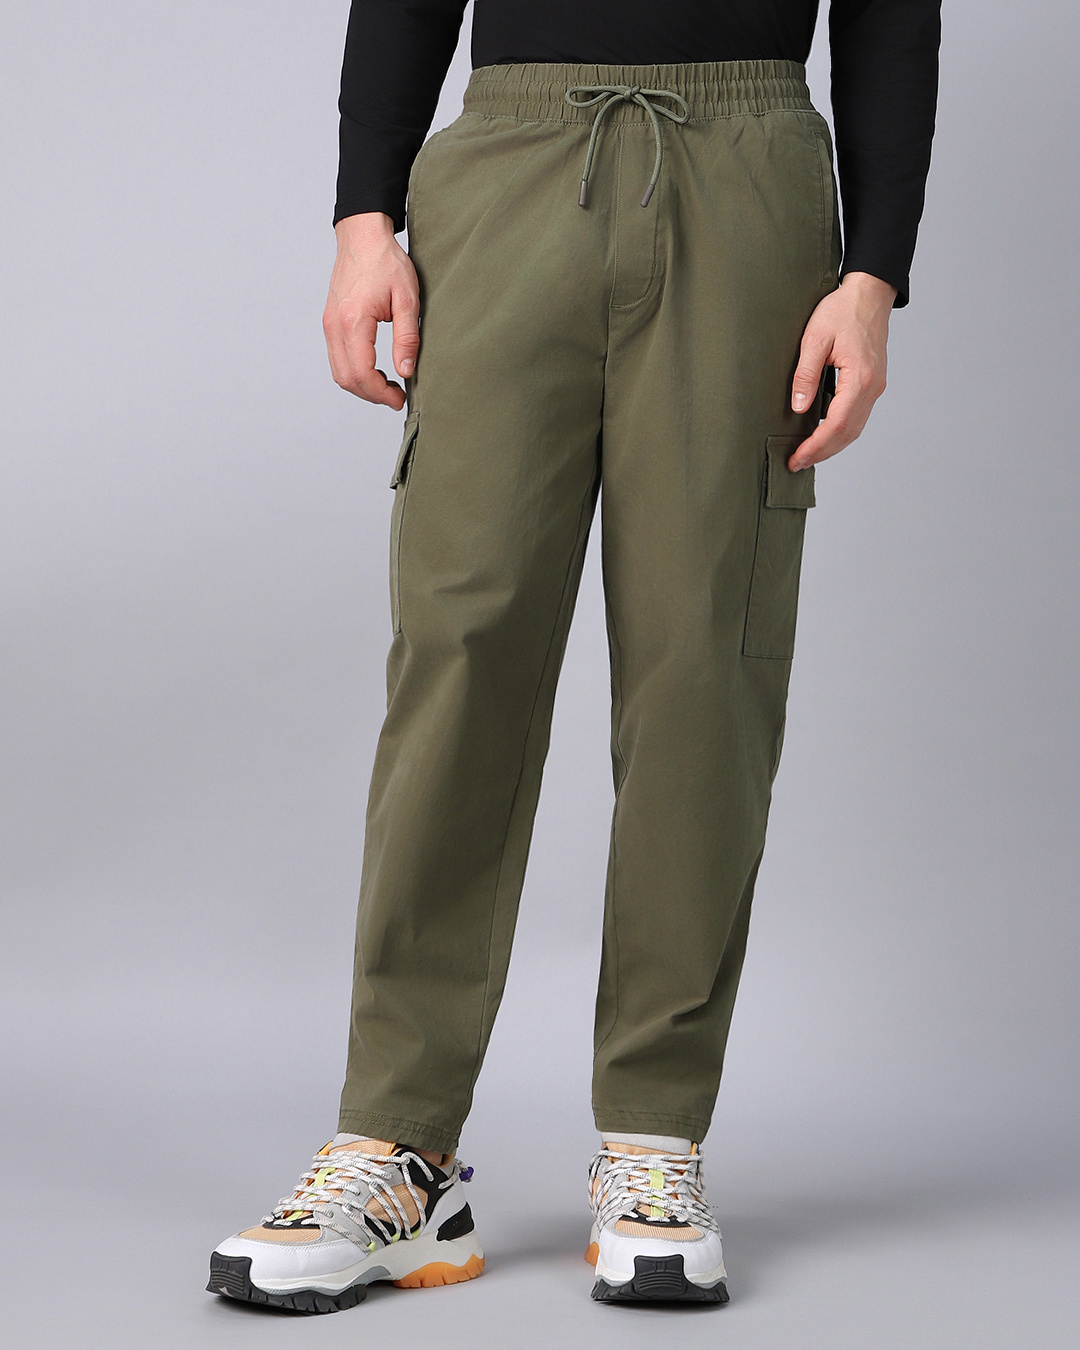 Men's Smart Stretch Chino in Light Olive Green - Woodies Clothing